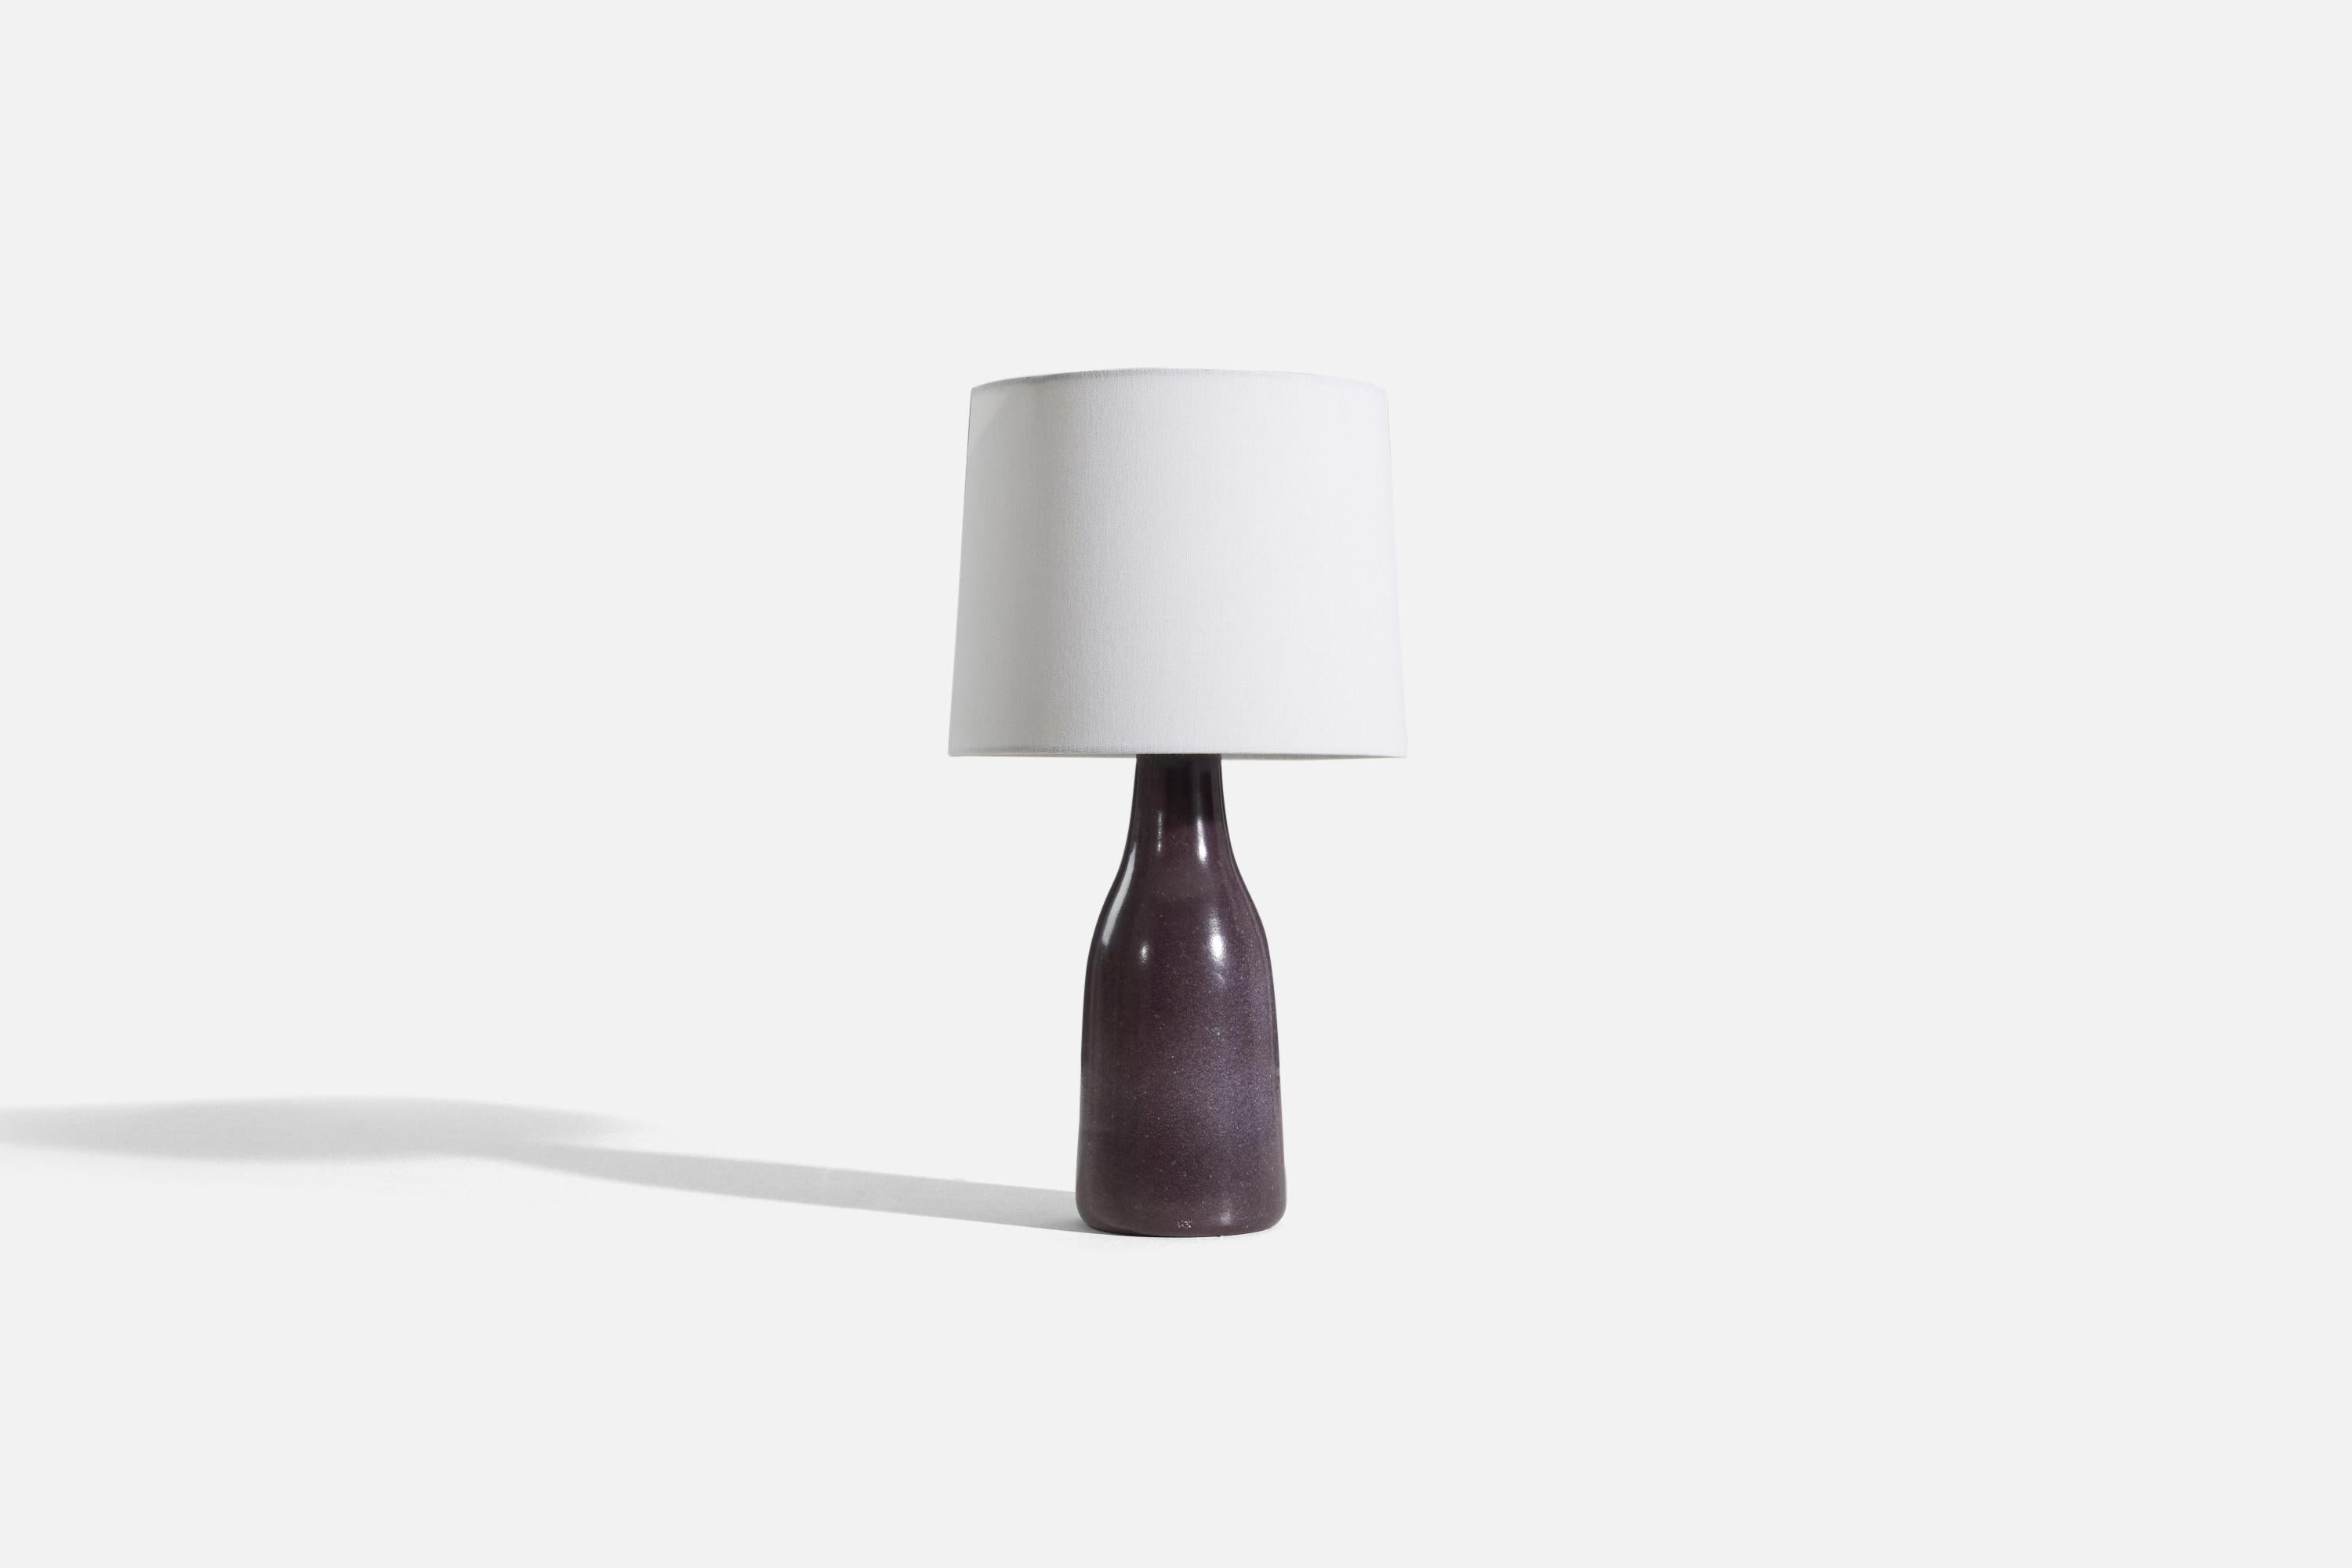 A purple-glazed earthenware table lamp designed and produced by Upsala-Ekeby, Sweden, 1930s.

Sold without lampshade. 
Dimensions of Lamp (inches) : 14.5 x 4.5 x 4.5 (H x W x D)
Dimensions of Shade (inches) : 9 x 10 x 8 (T x B x H)
Dimension of